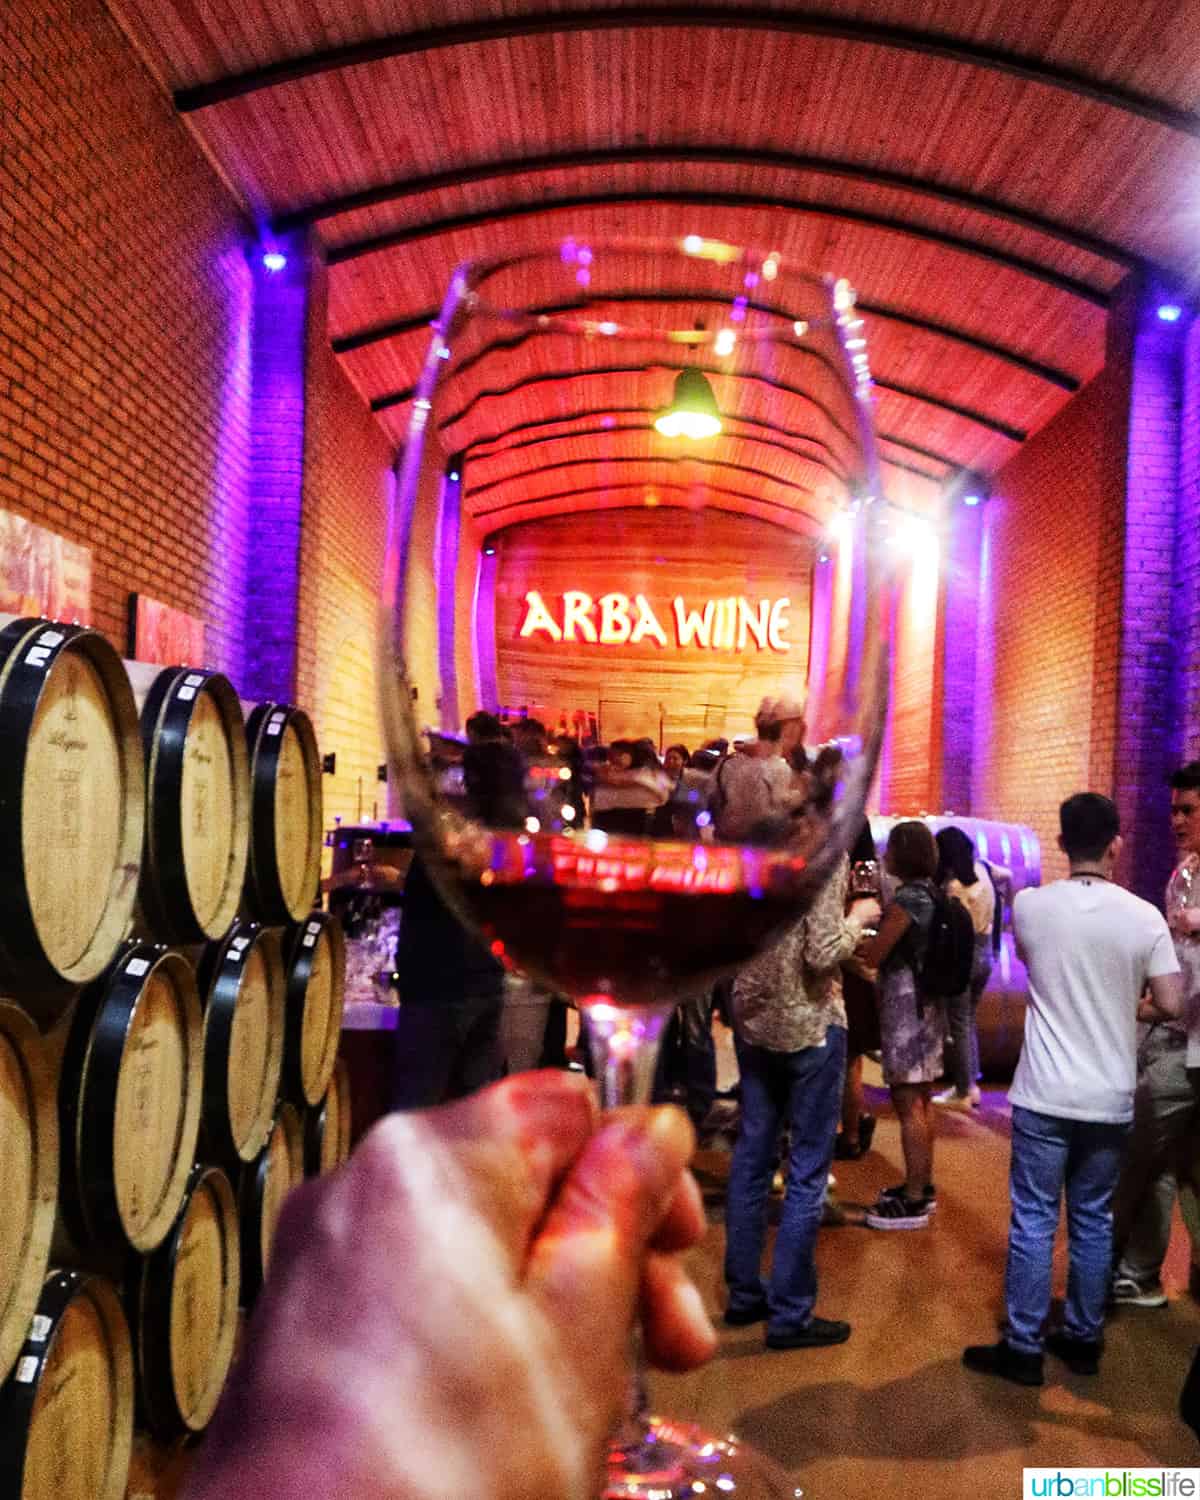 hand holding a glass of red wine up with "arba Wine" in neon lights in the background within a barrel room in Almaty Kazakhstan.